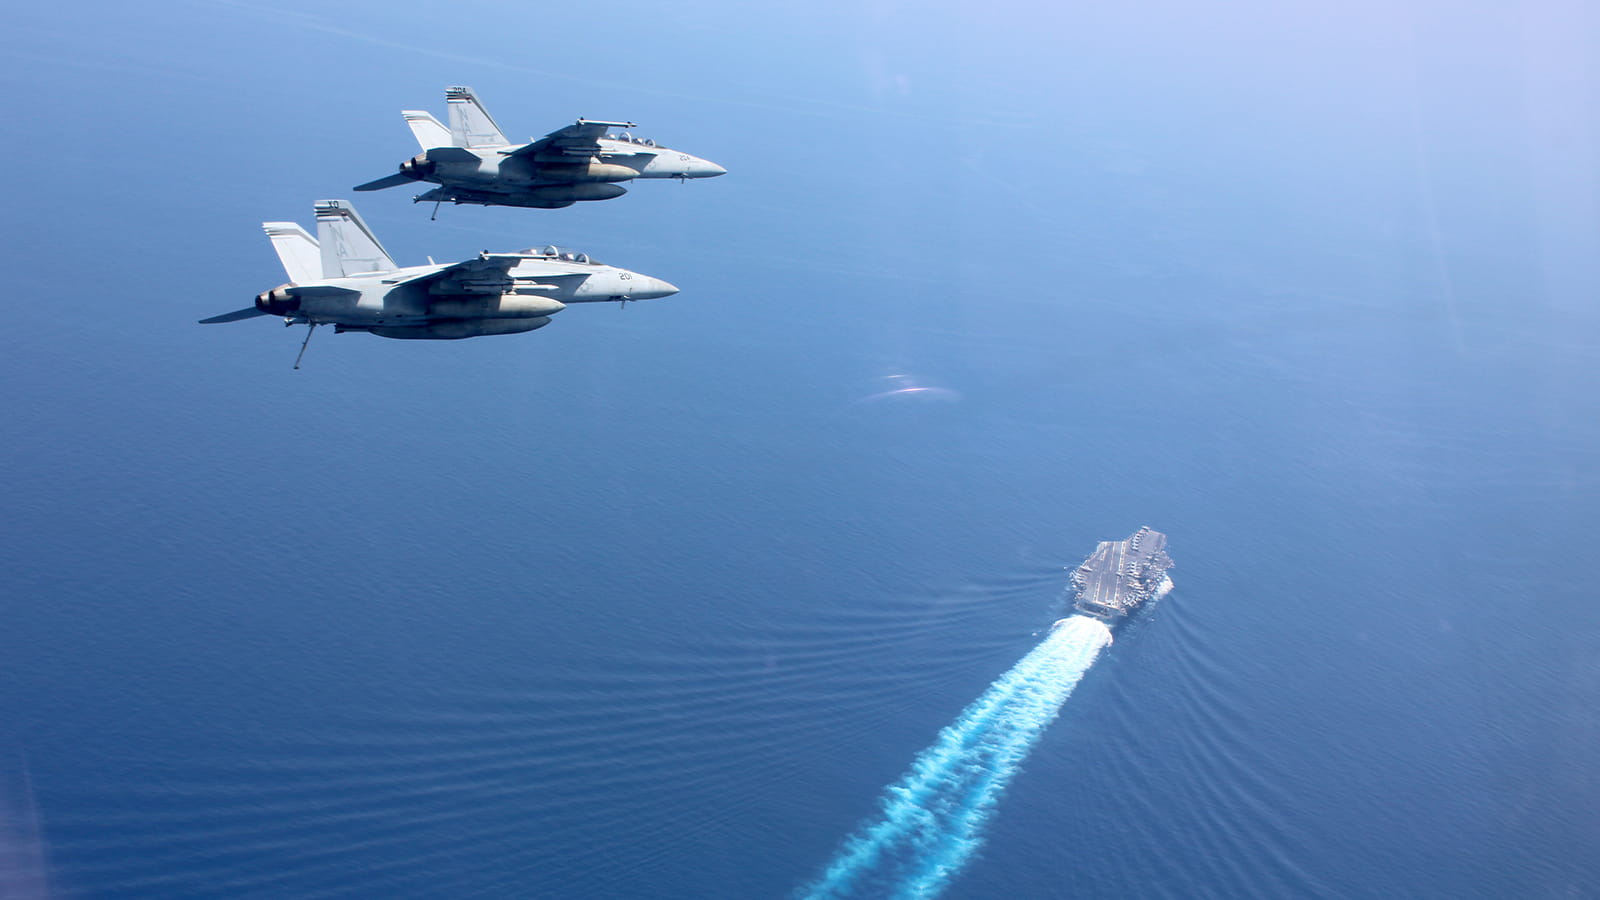  F/A-18F Super Hornets from the “Mighty Shrikes” of Strike Fighter Squadron (VFA) 94 fly in formation above the aircraft carrier USS Nimitz (CVN 68)